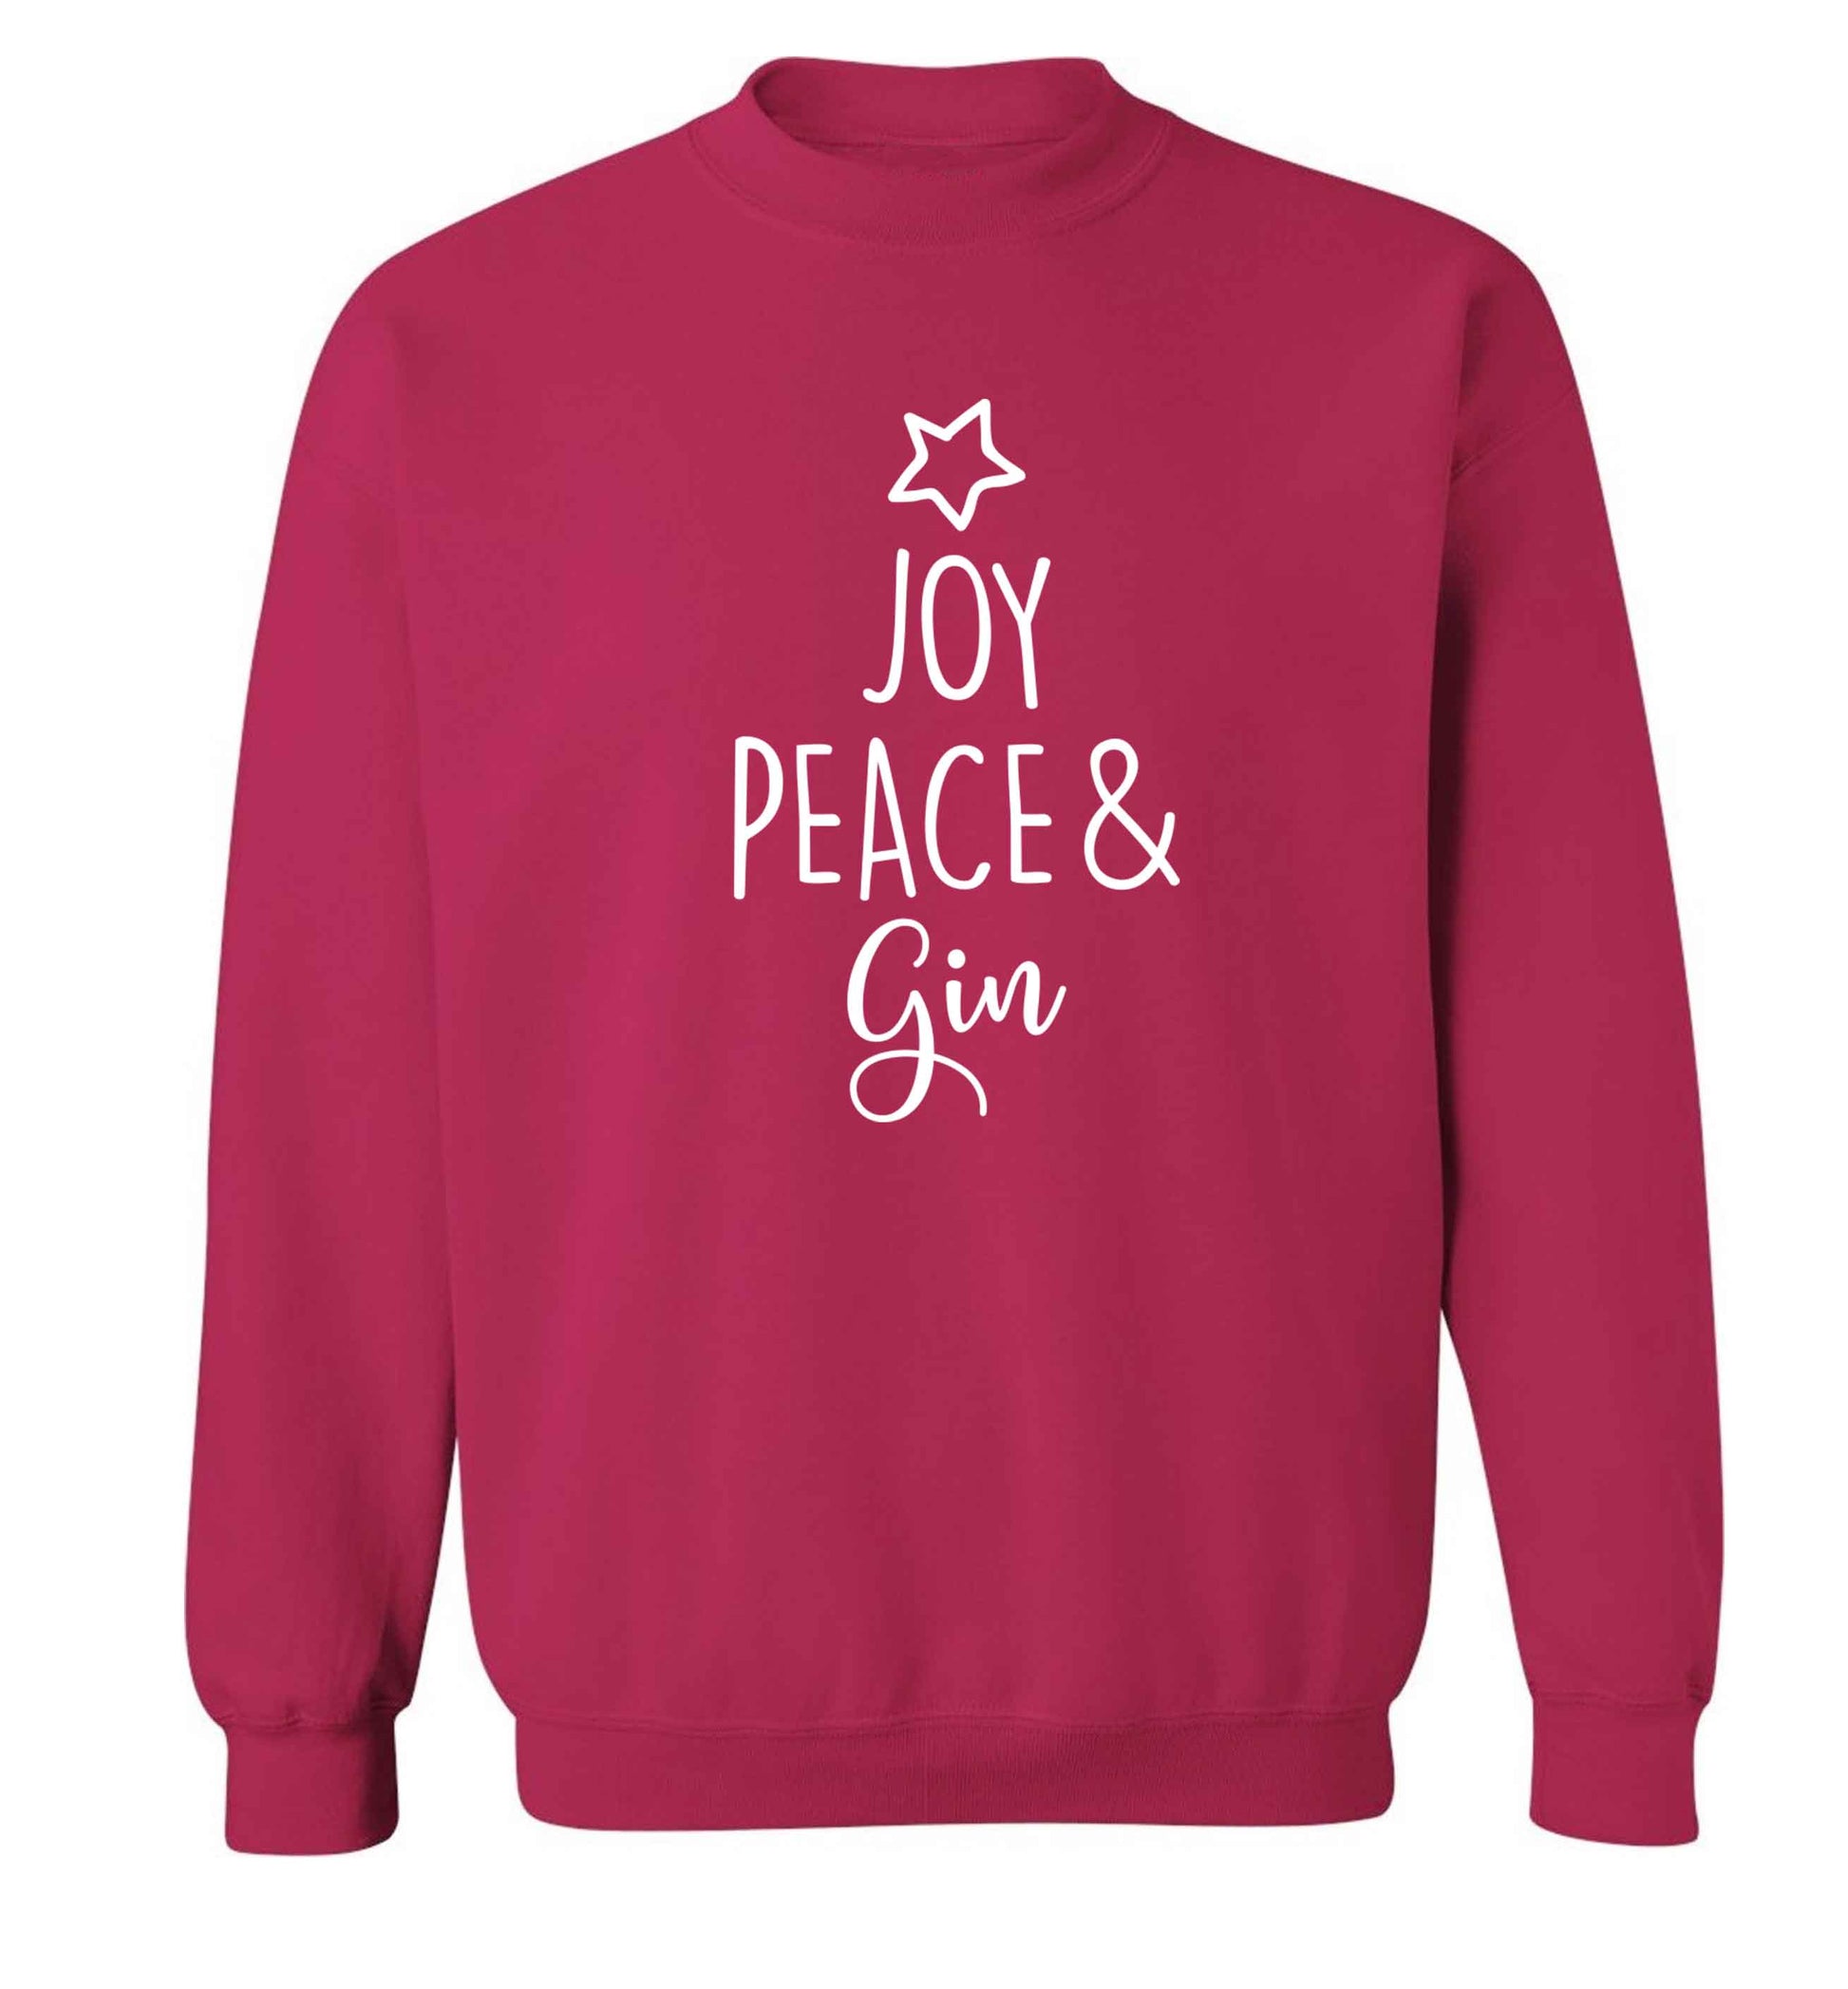 Joy peace and gin Adult's unisex pink Sweater 2XL